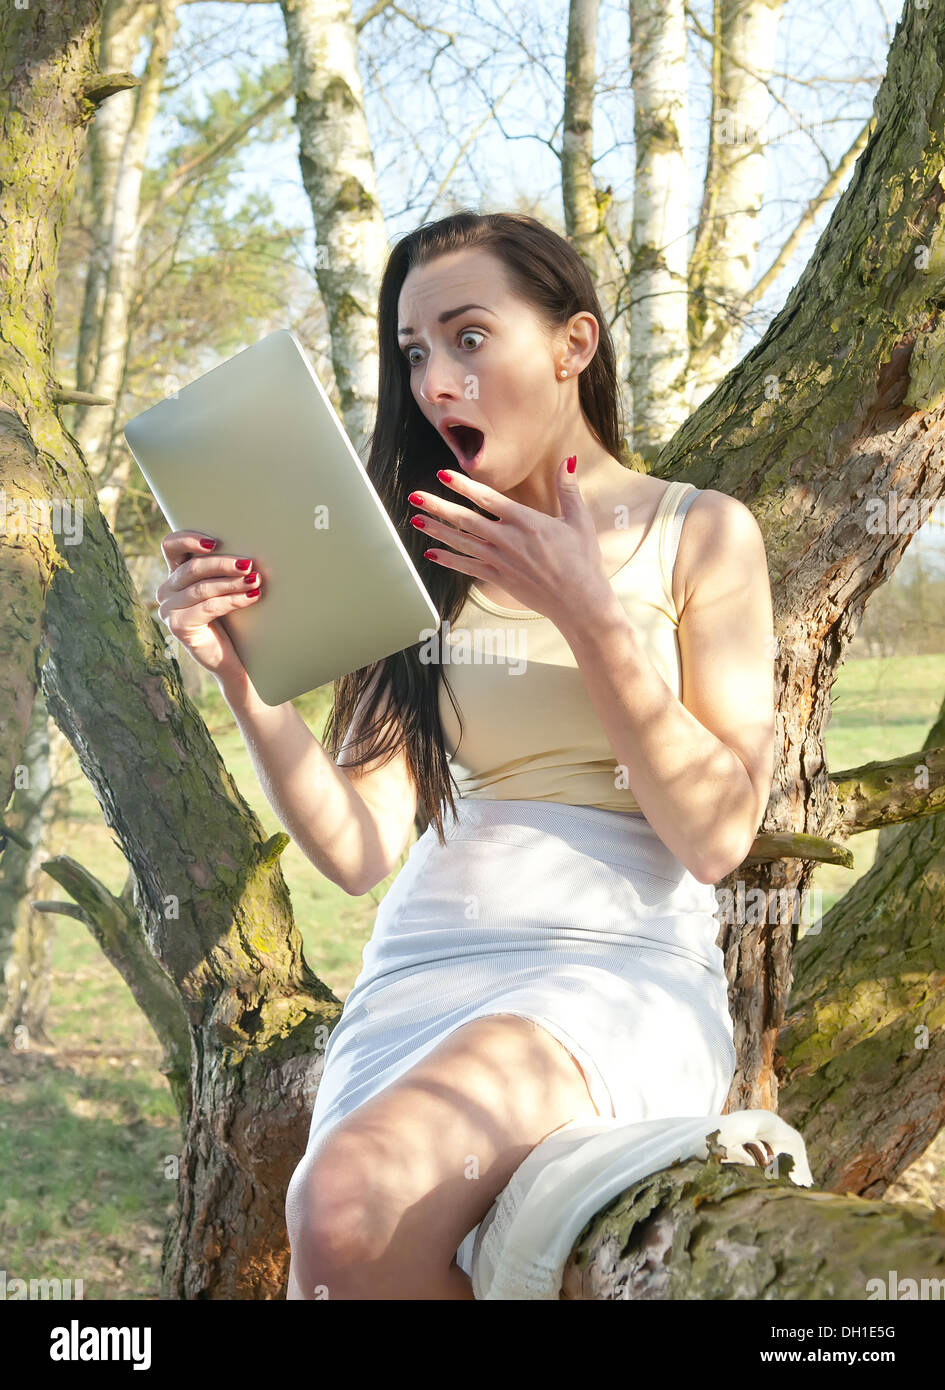 shocked young woman with tablet pc Stock Photo